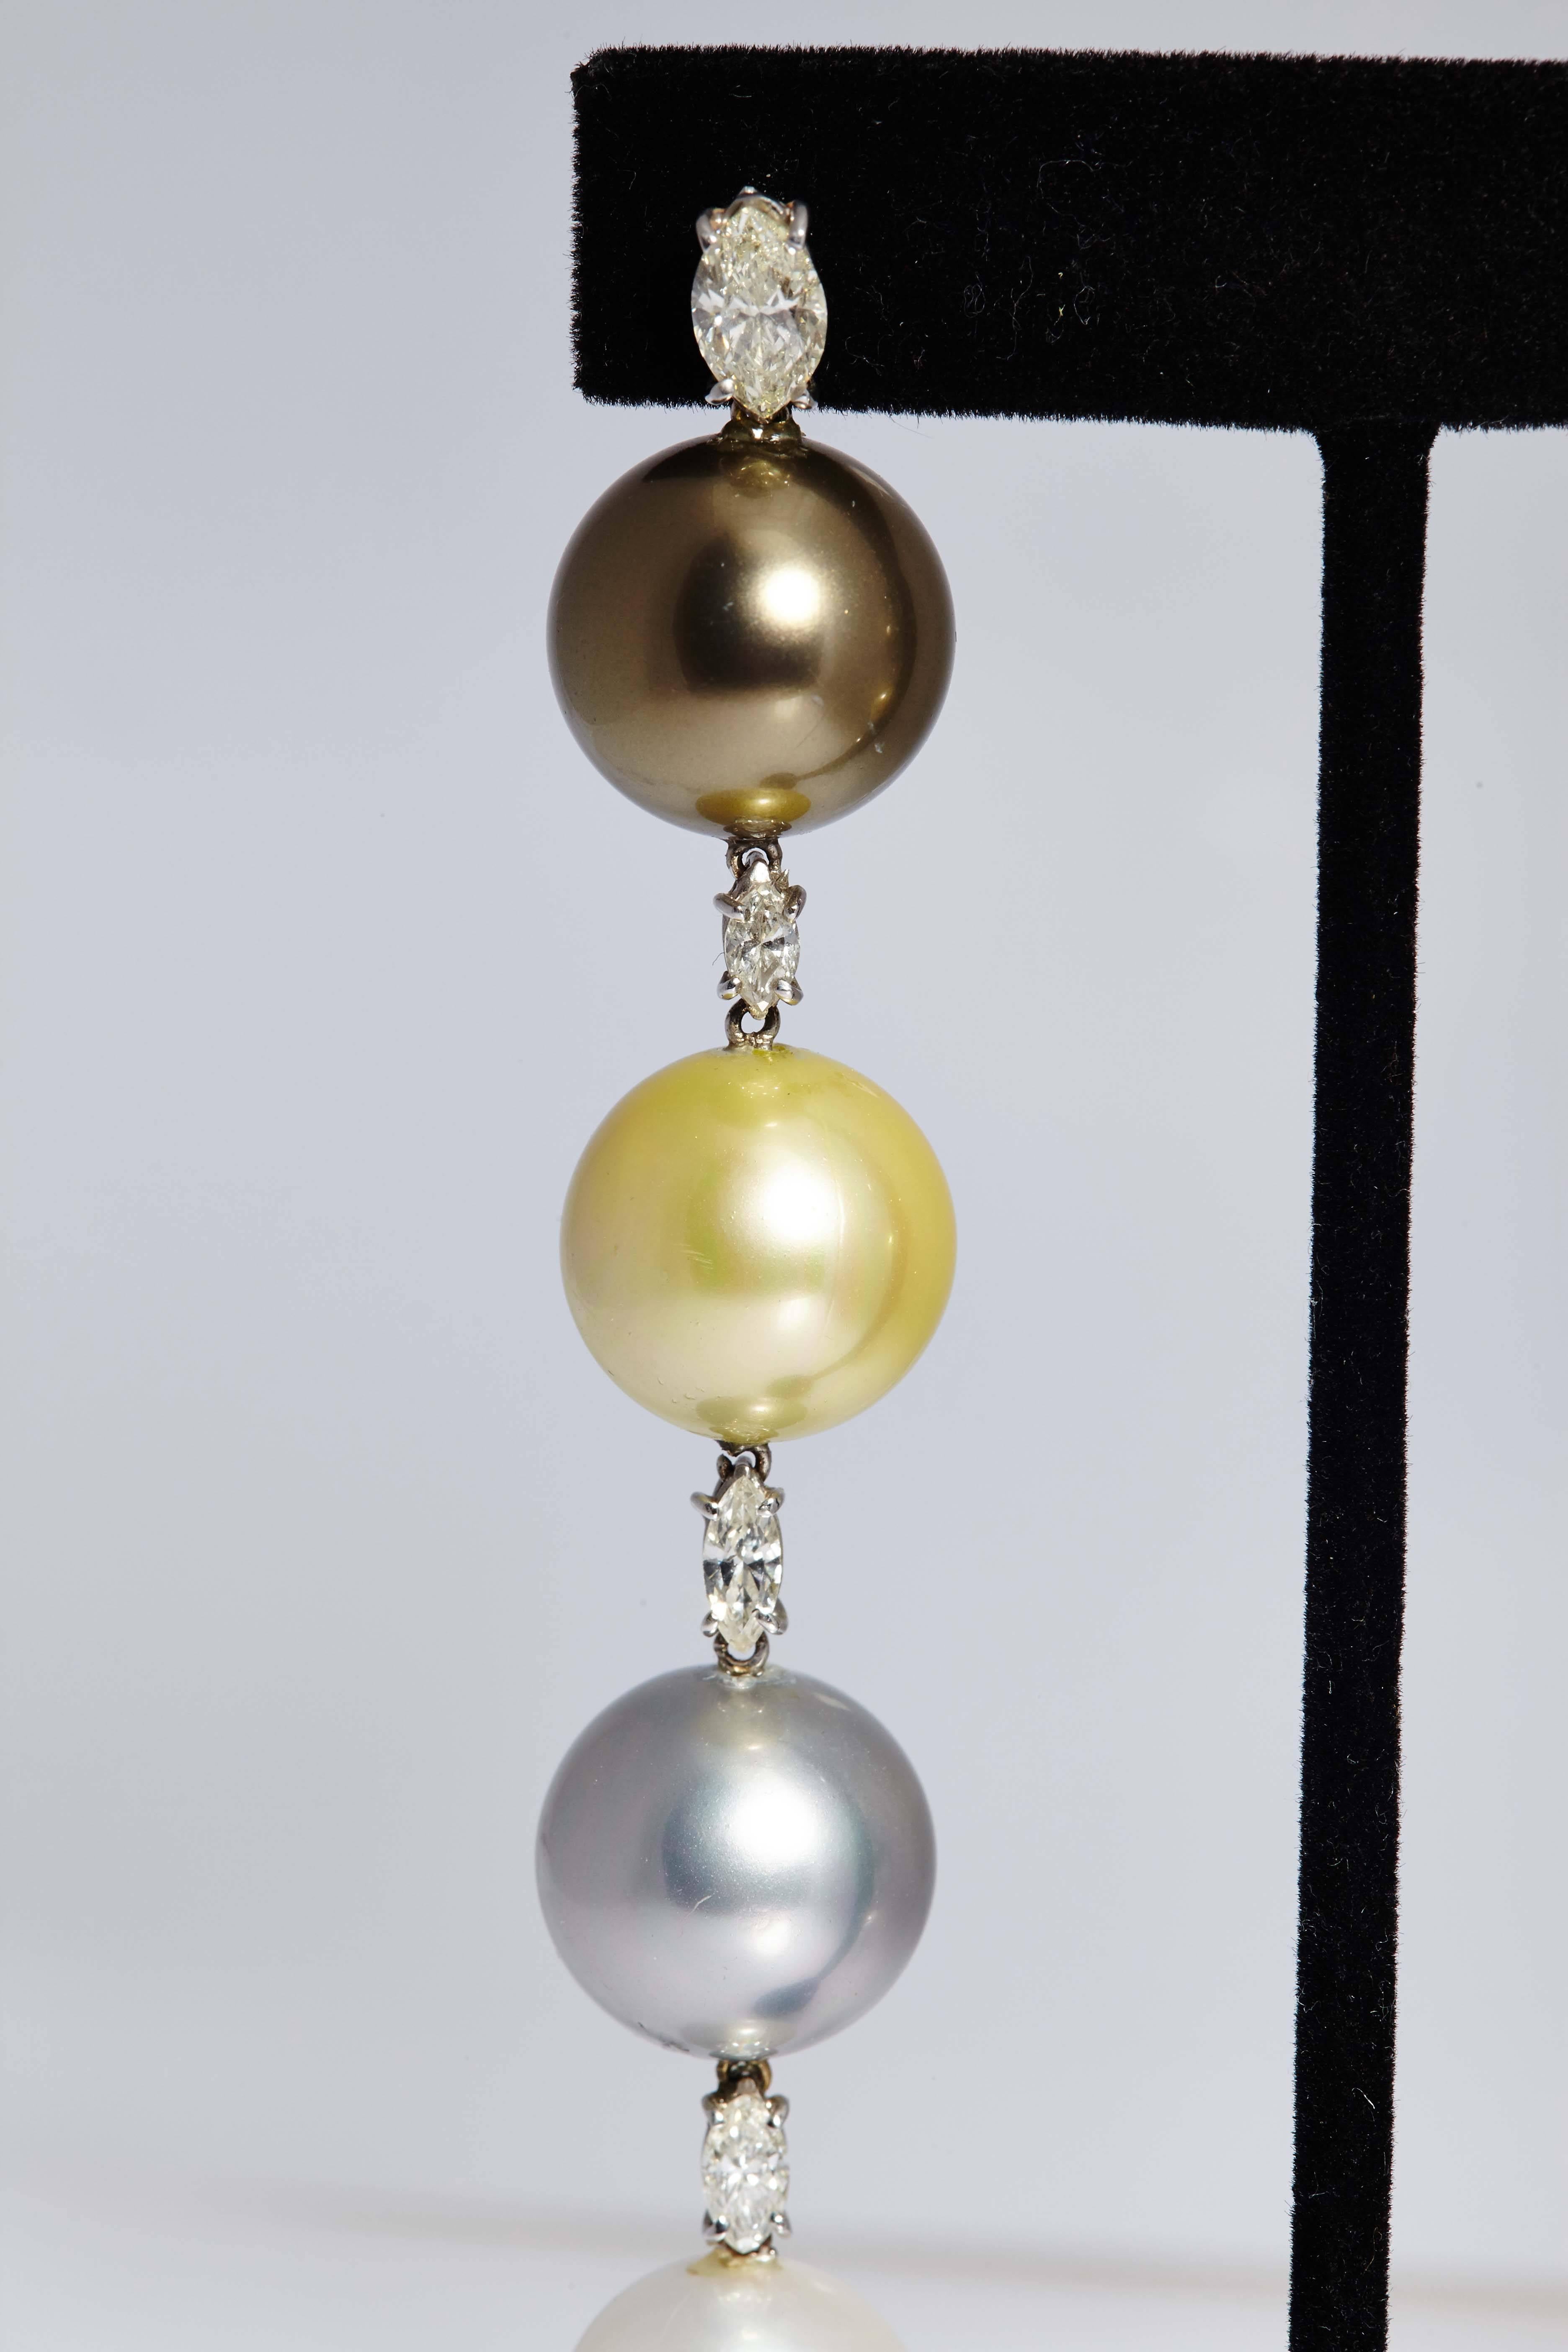 An impressive White Gold Ear Pendants with Multi-Color Cultured Pearls, Marquise-Cut Diamonds and Diamond Briollettes, Diamonds weight: 5.50cts. Made in Italy circa 1980. 